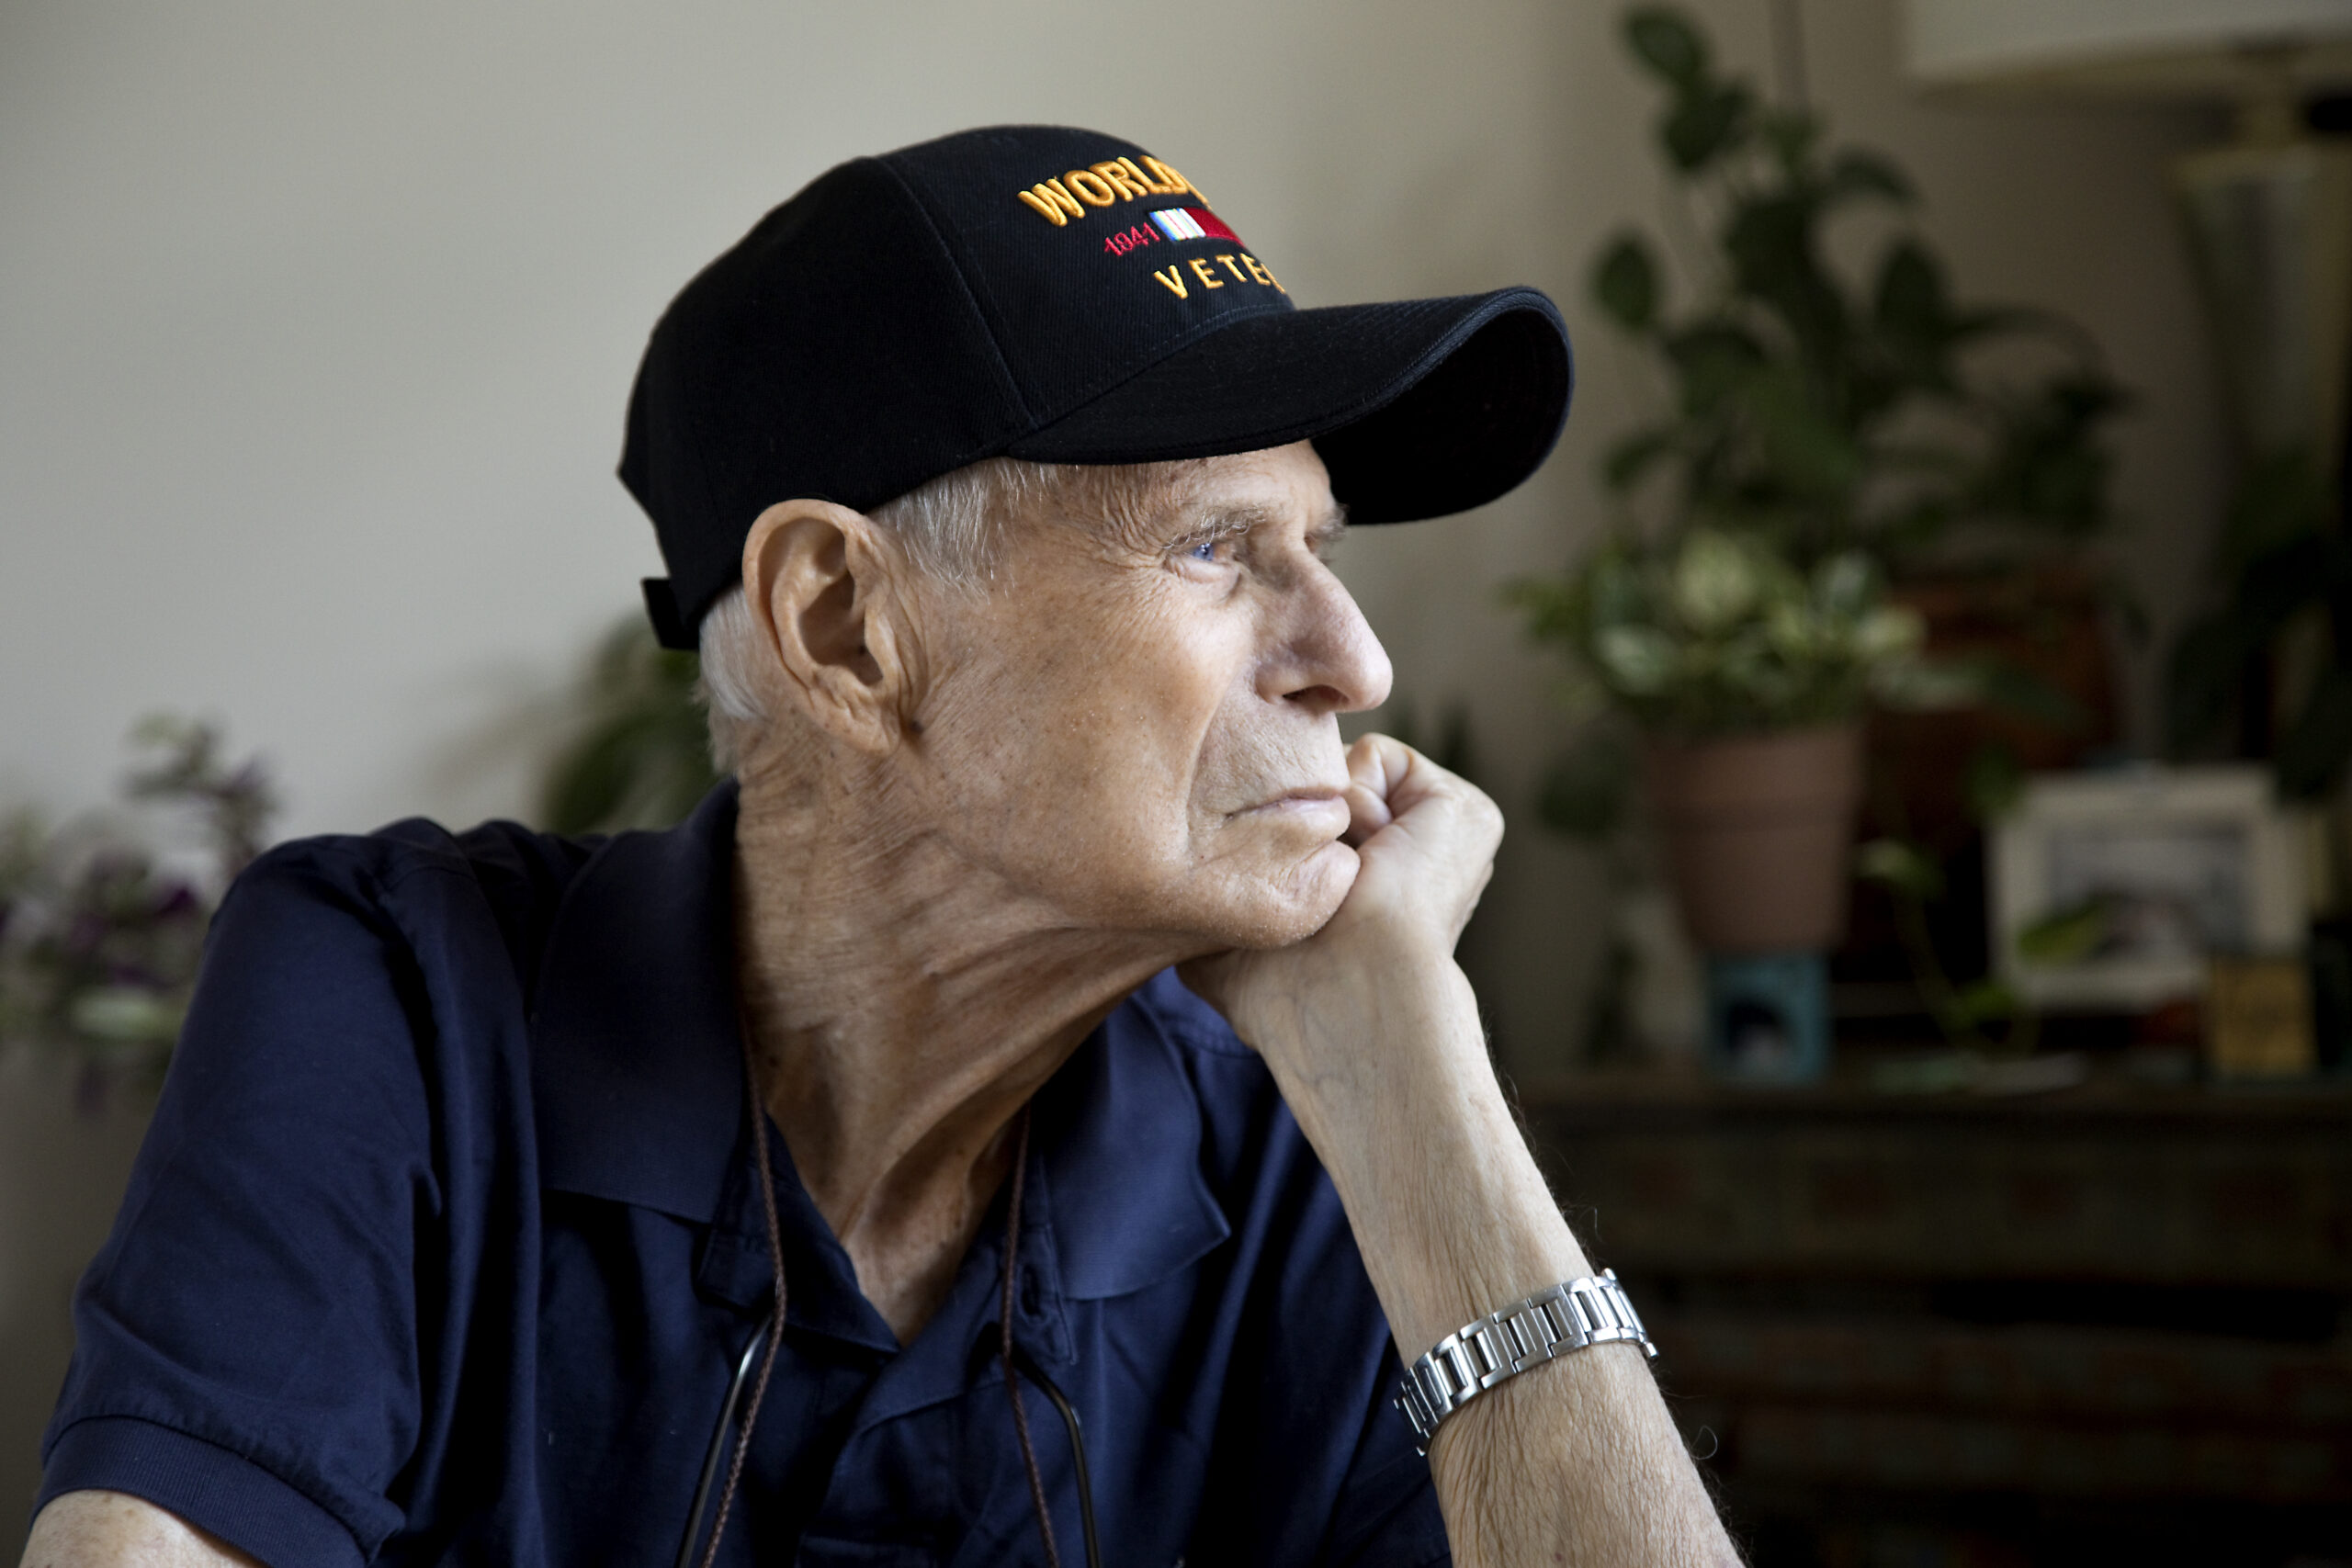 Elderly veteran wearing World War Two cap thinking about what’s next while approaching the end of life.